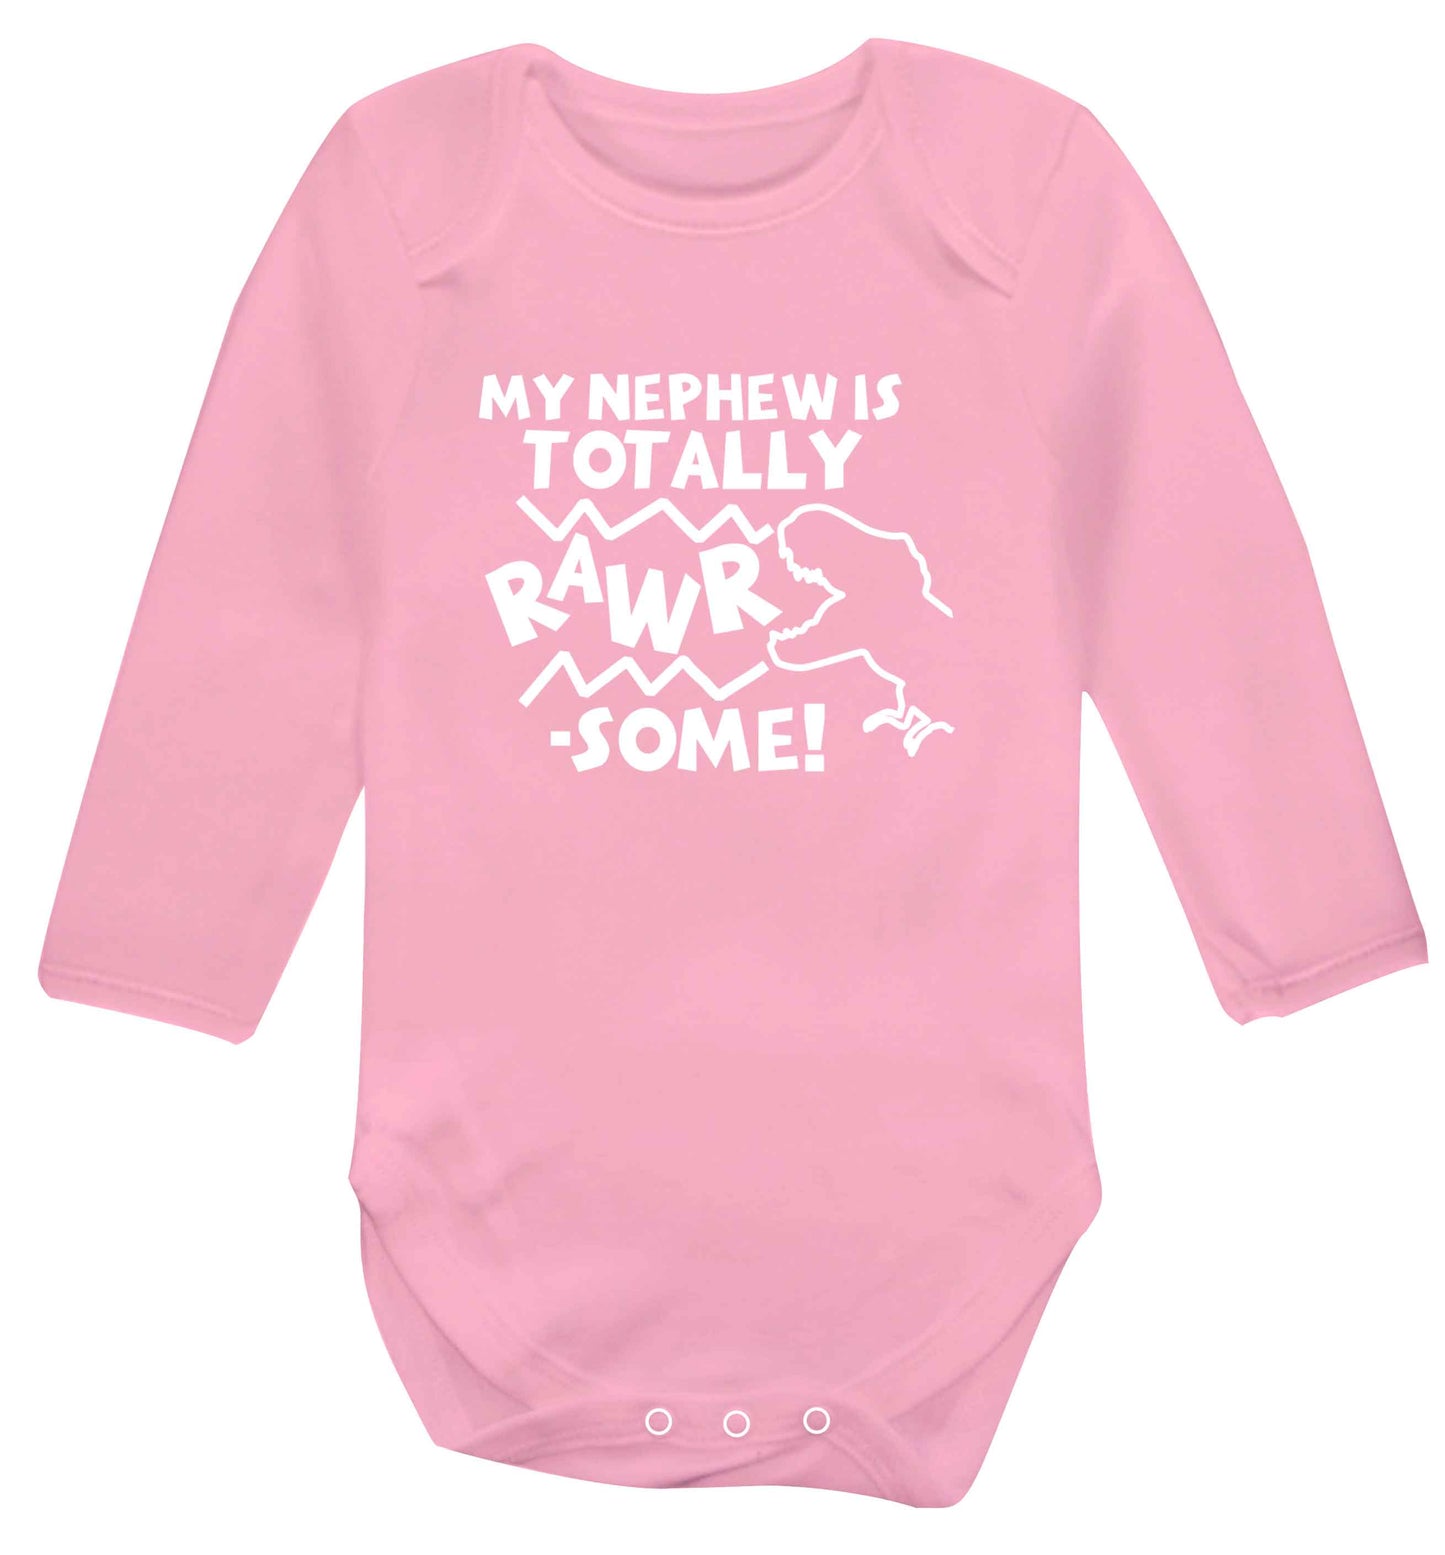 My nephew is totally rawrsome baby vest long sleeved pale pink 6-12 months